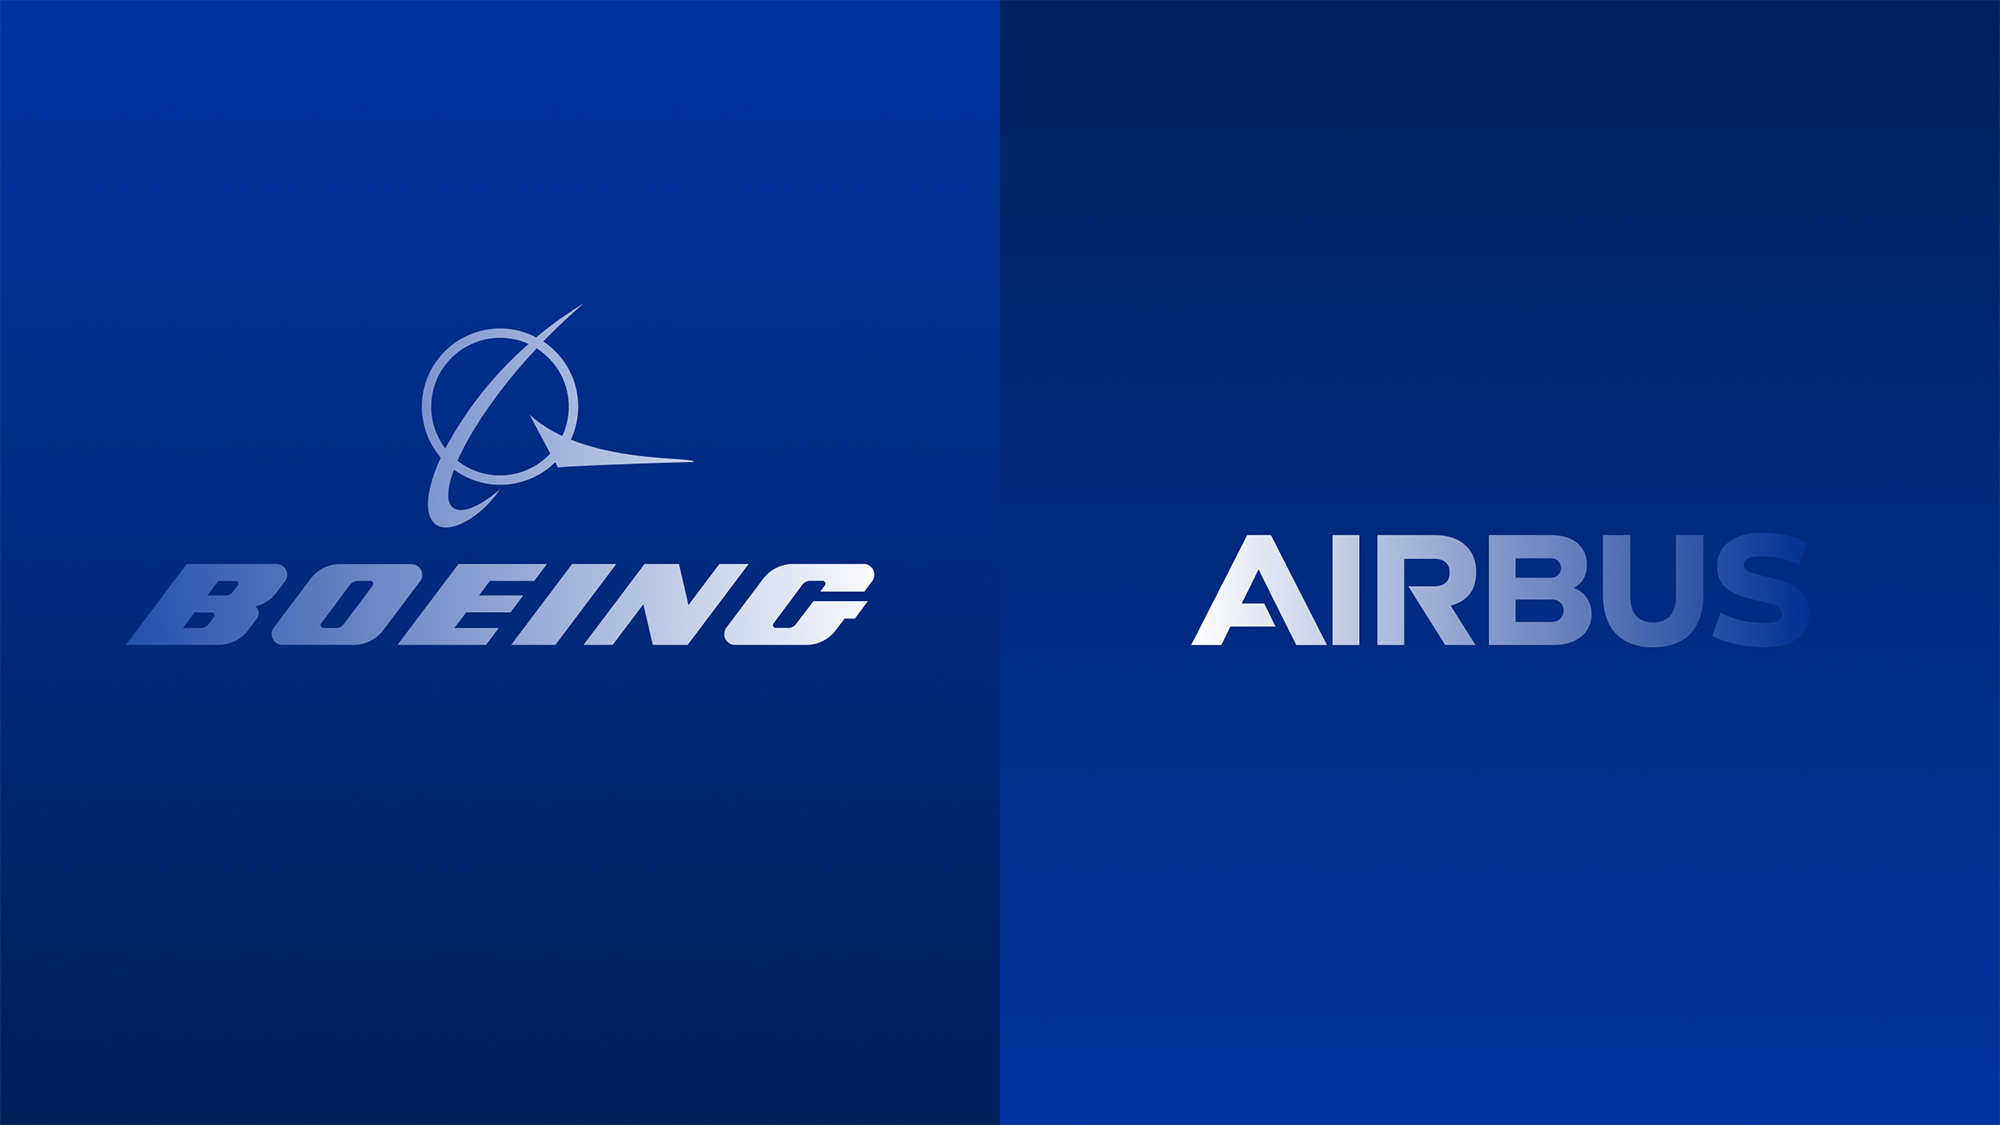 Titans of the sky – discover the Boeing-Airbus duopoly